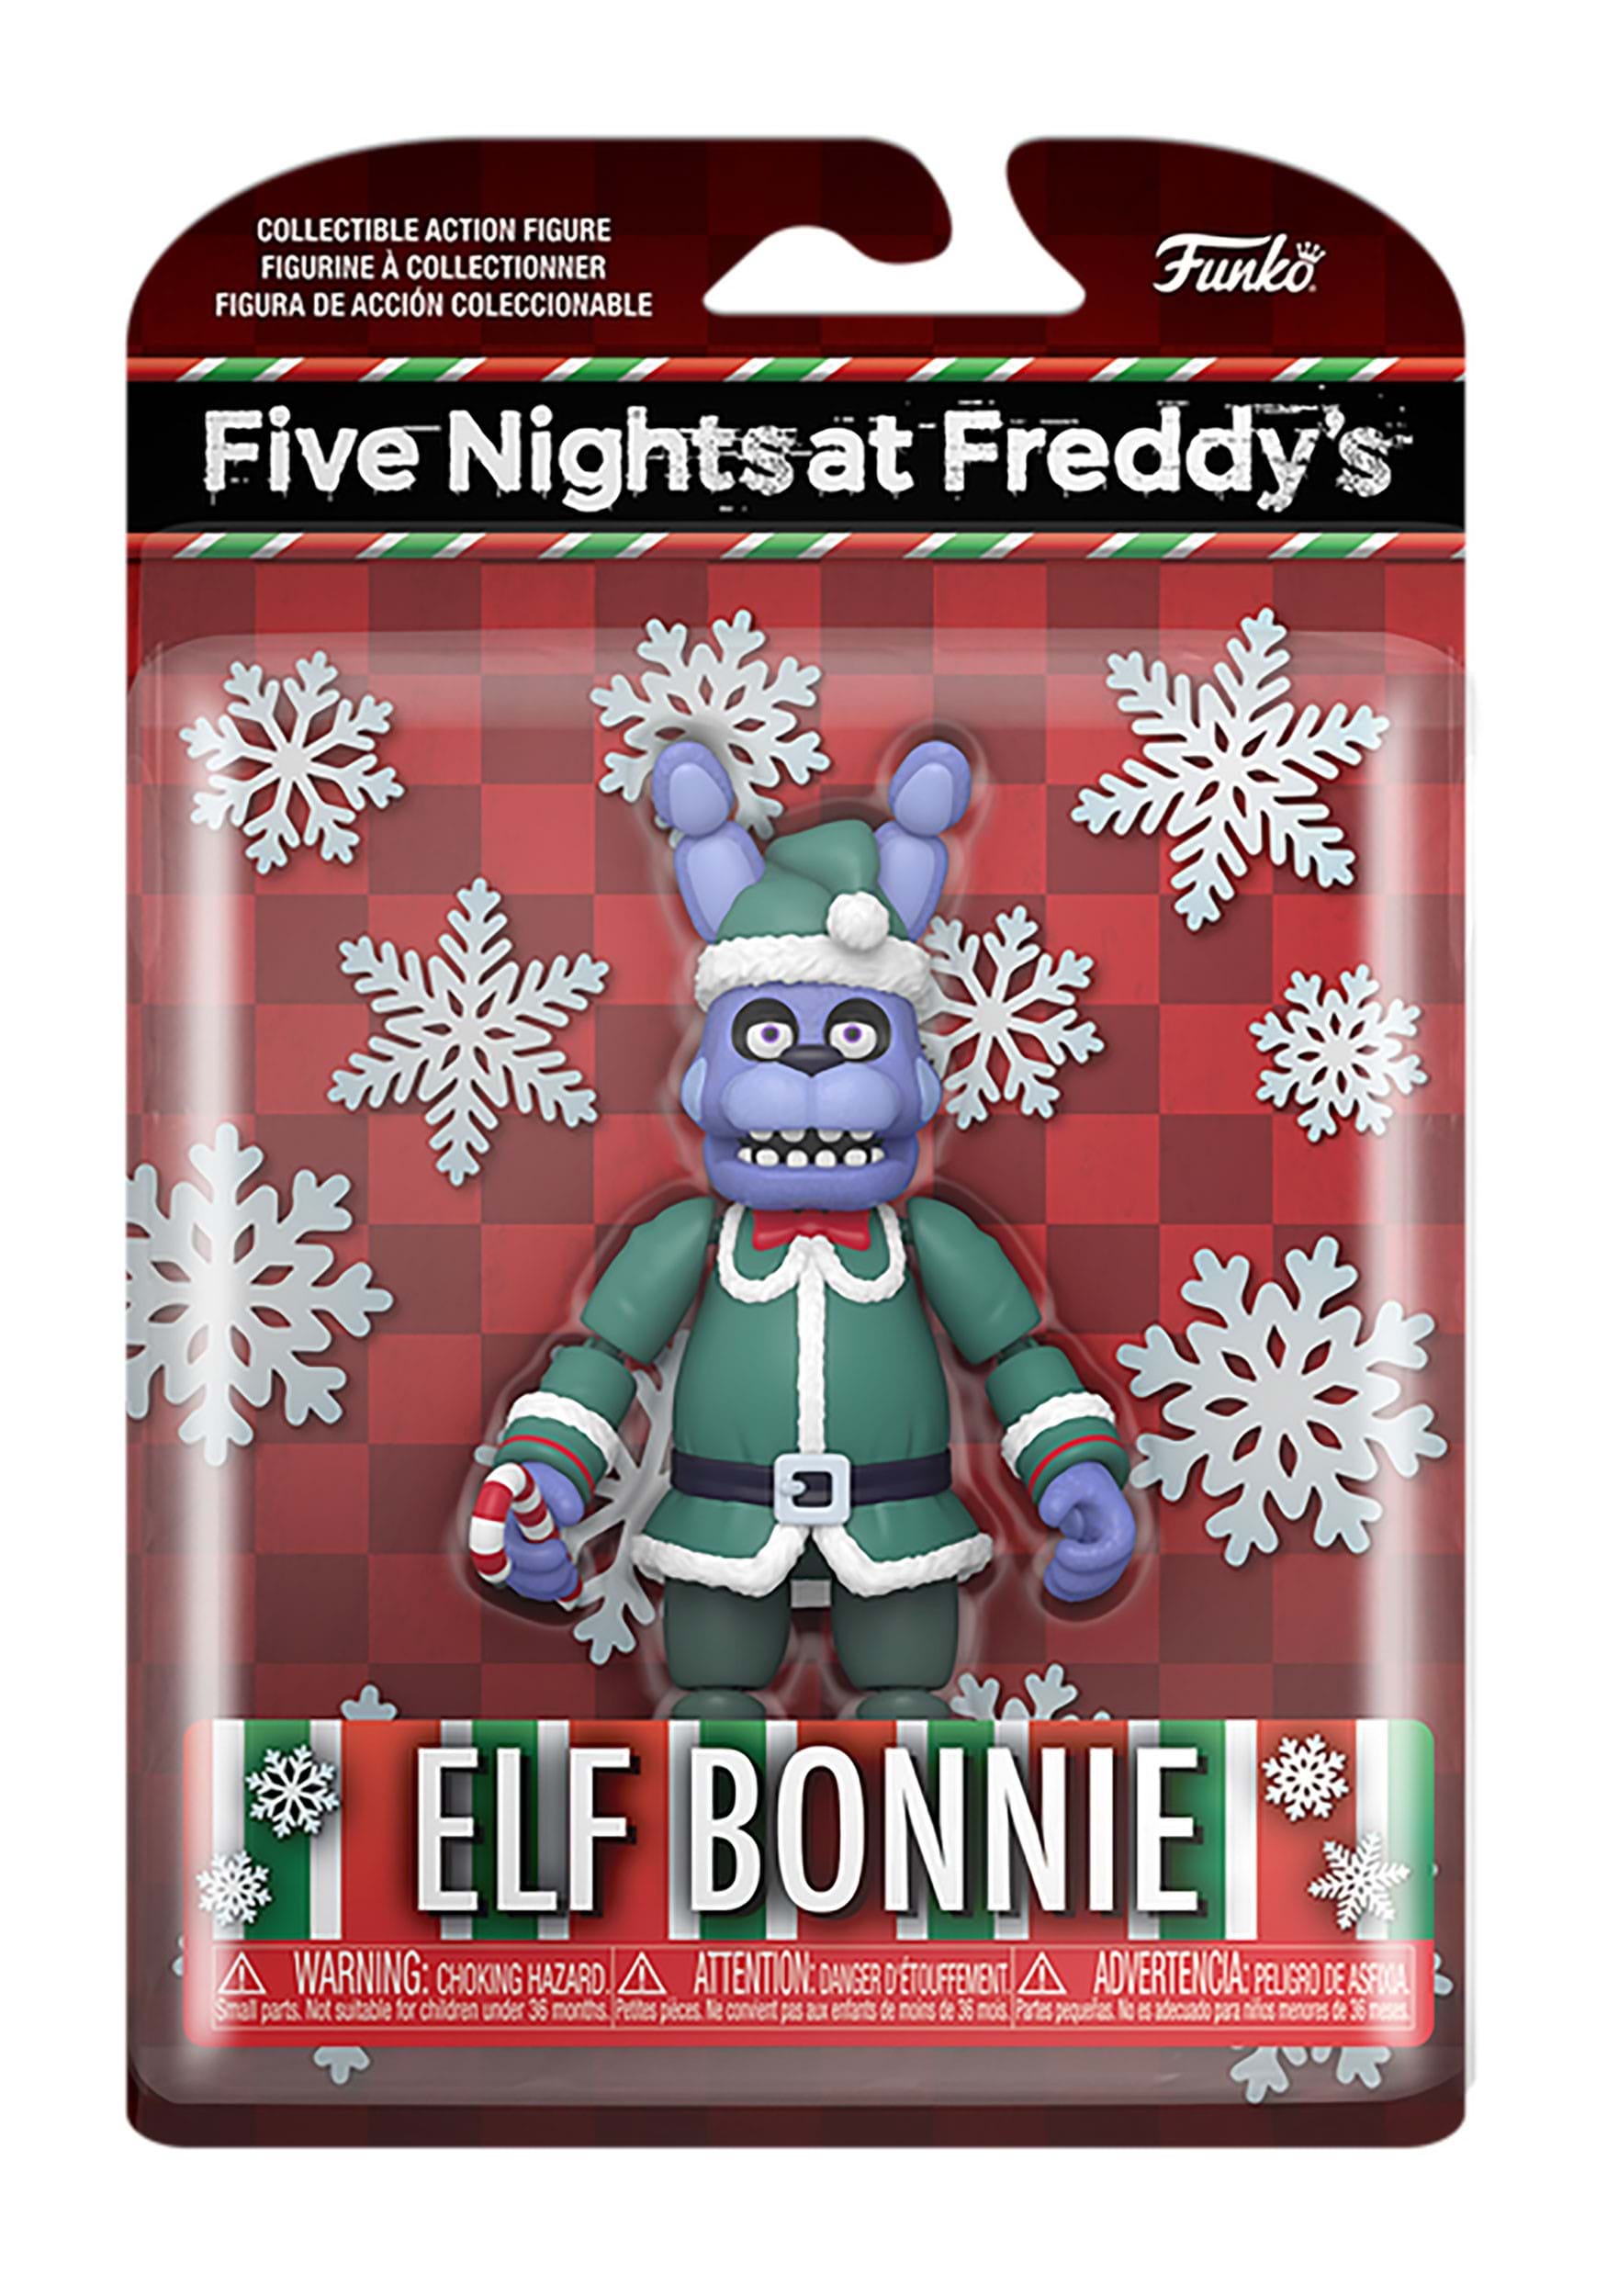 Fun.com Has Gifts For Fans of the NFL, Godzilla, Stitch, Snoopy, & Friends!  ~ Review